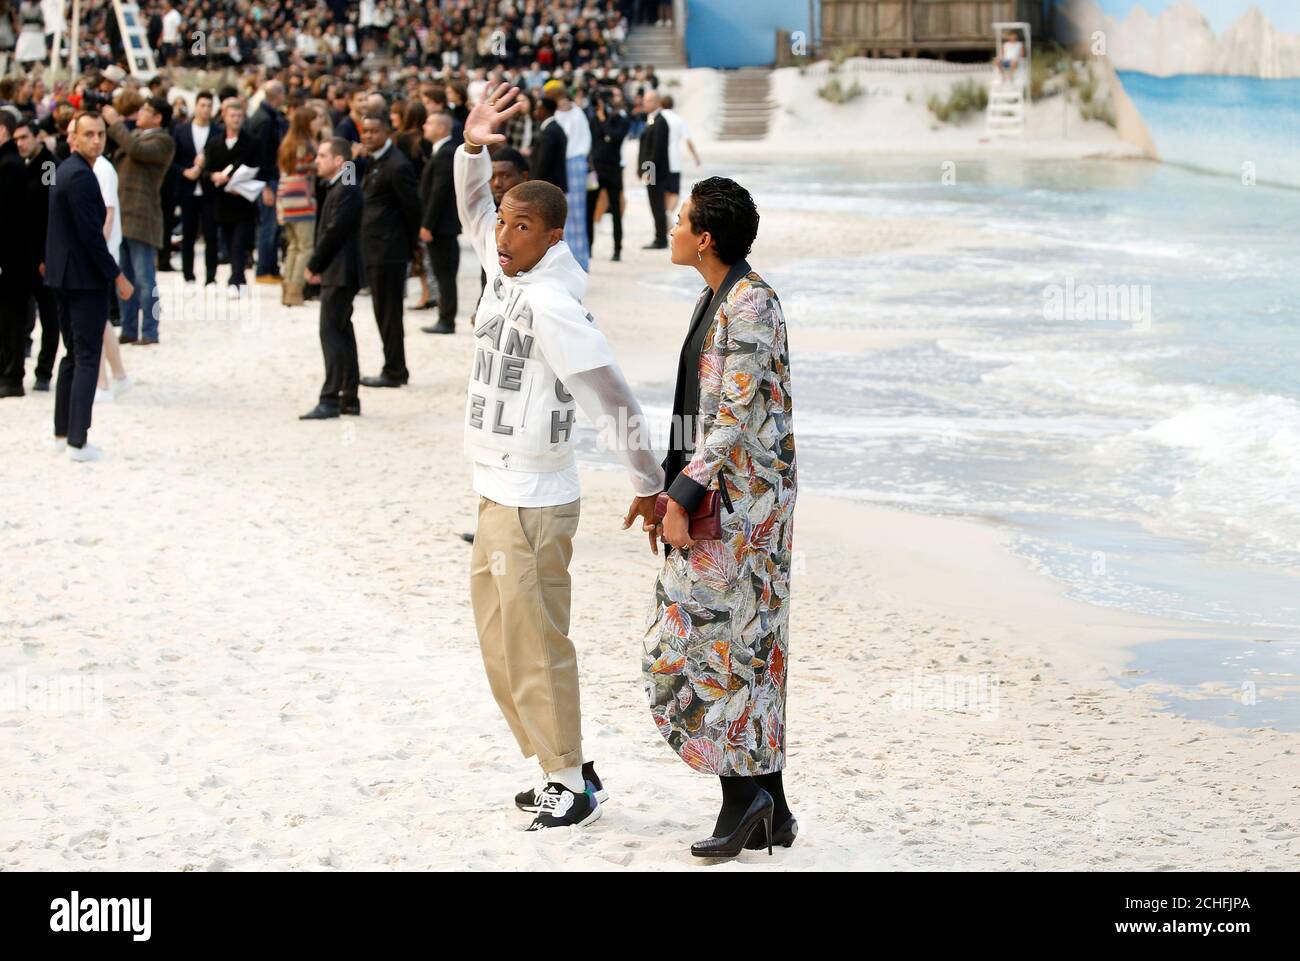 Pharrell Williams and Helen Lasichanh arrive to attend the Chanel Spring/Summer women's ready-to-wear collection show at the Grand Palais transformed as a beach scene during Paris Fashion Week Paris, France,